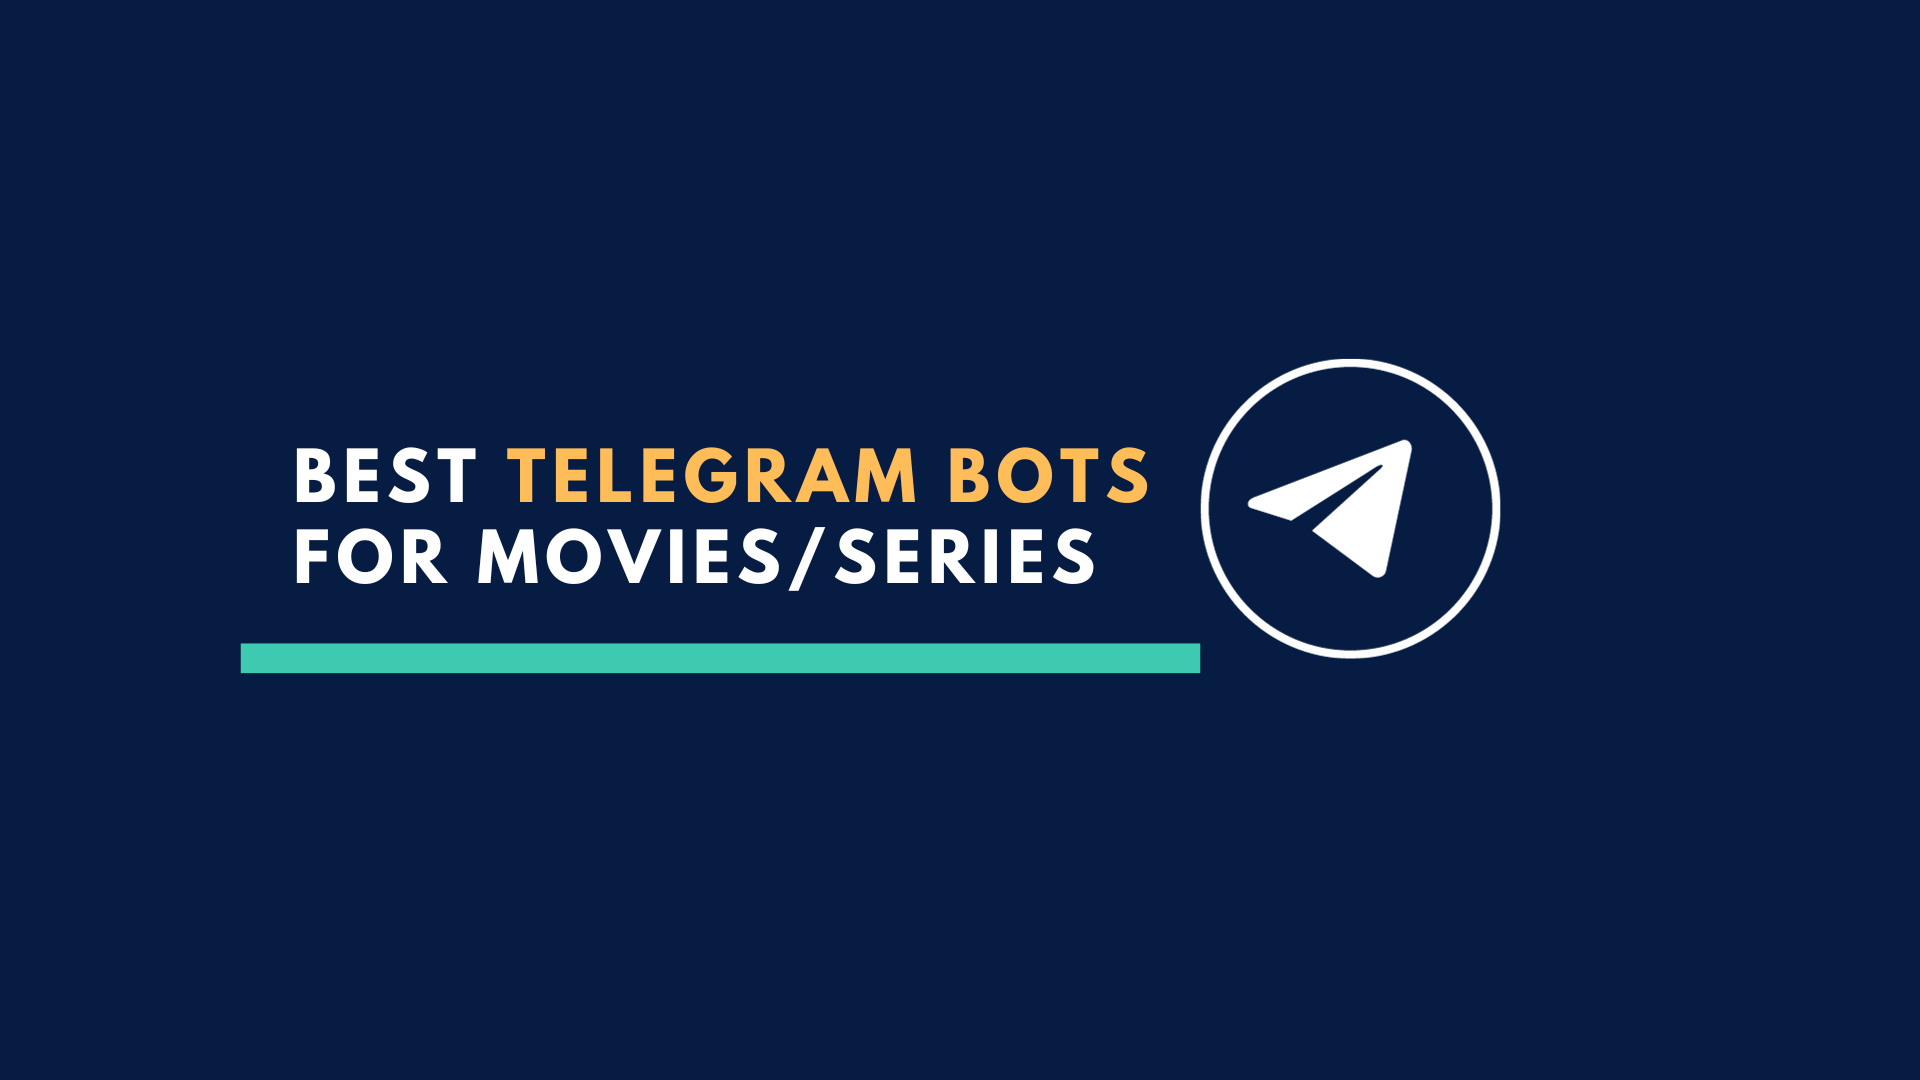 Best Telegram Bots for Movies and Series